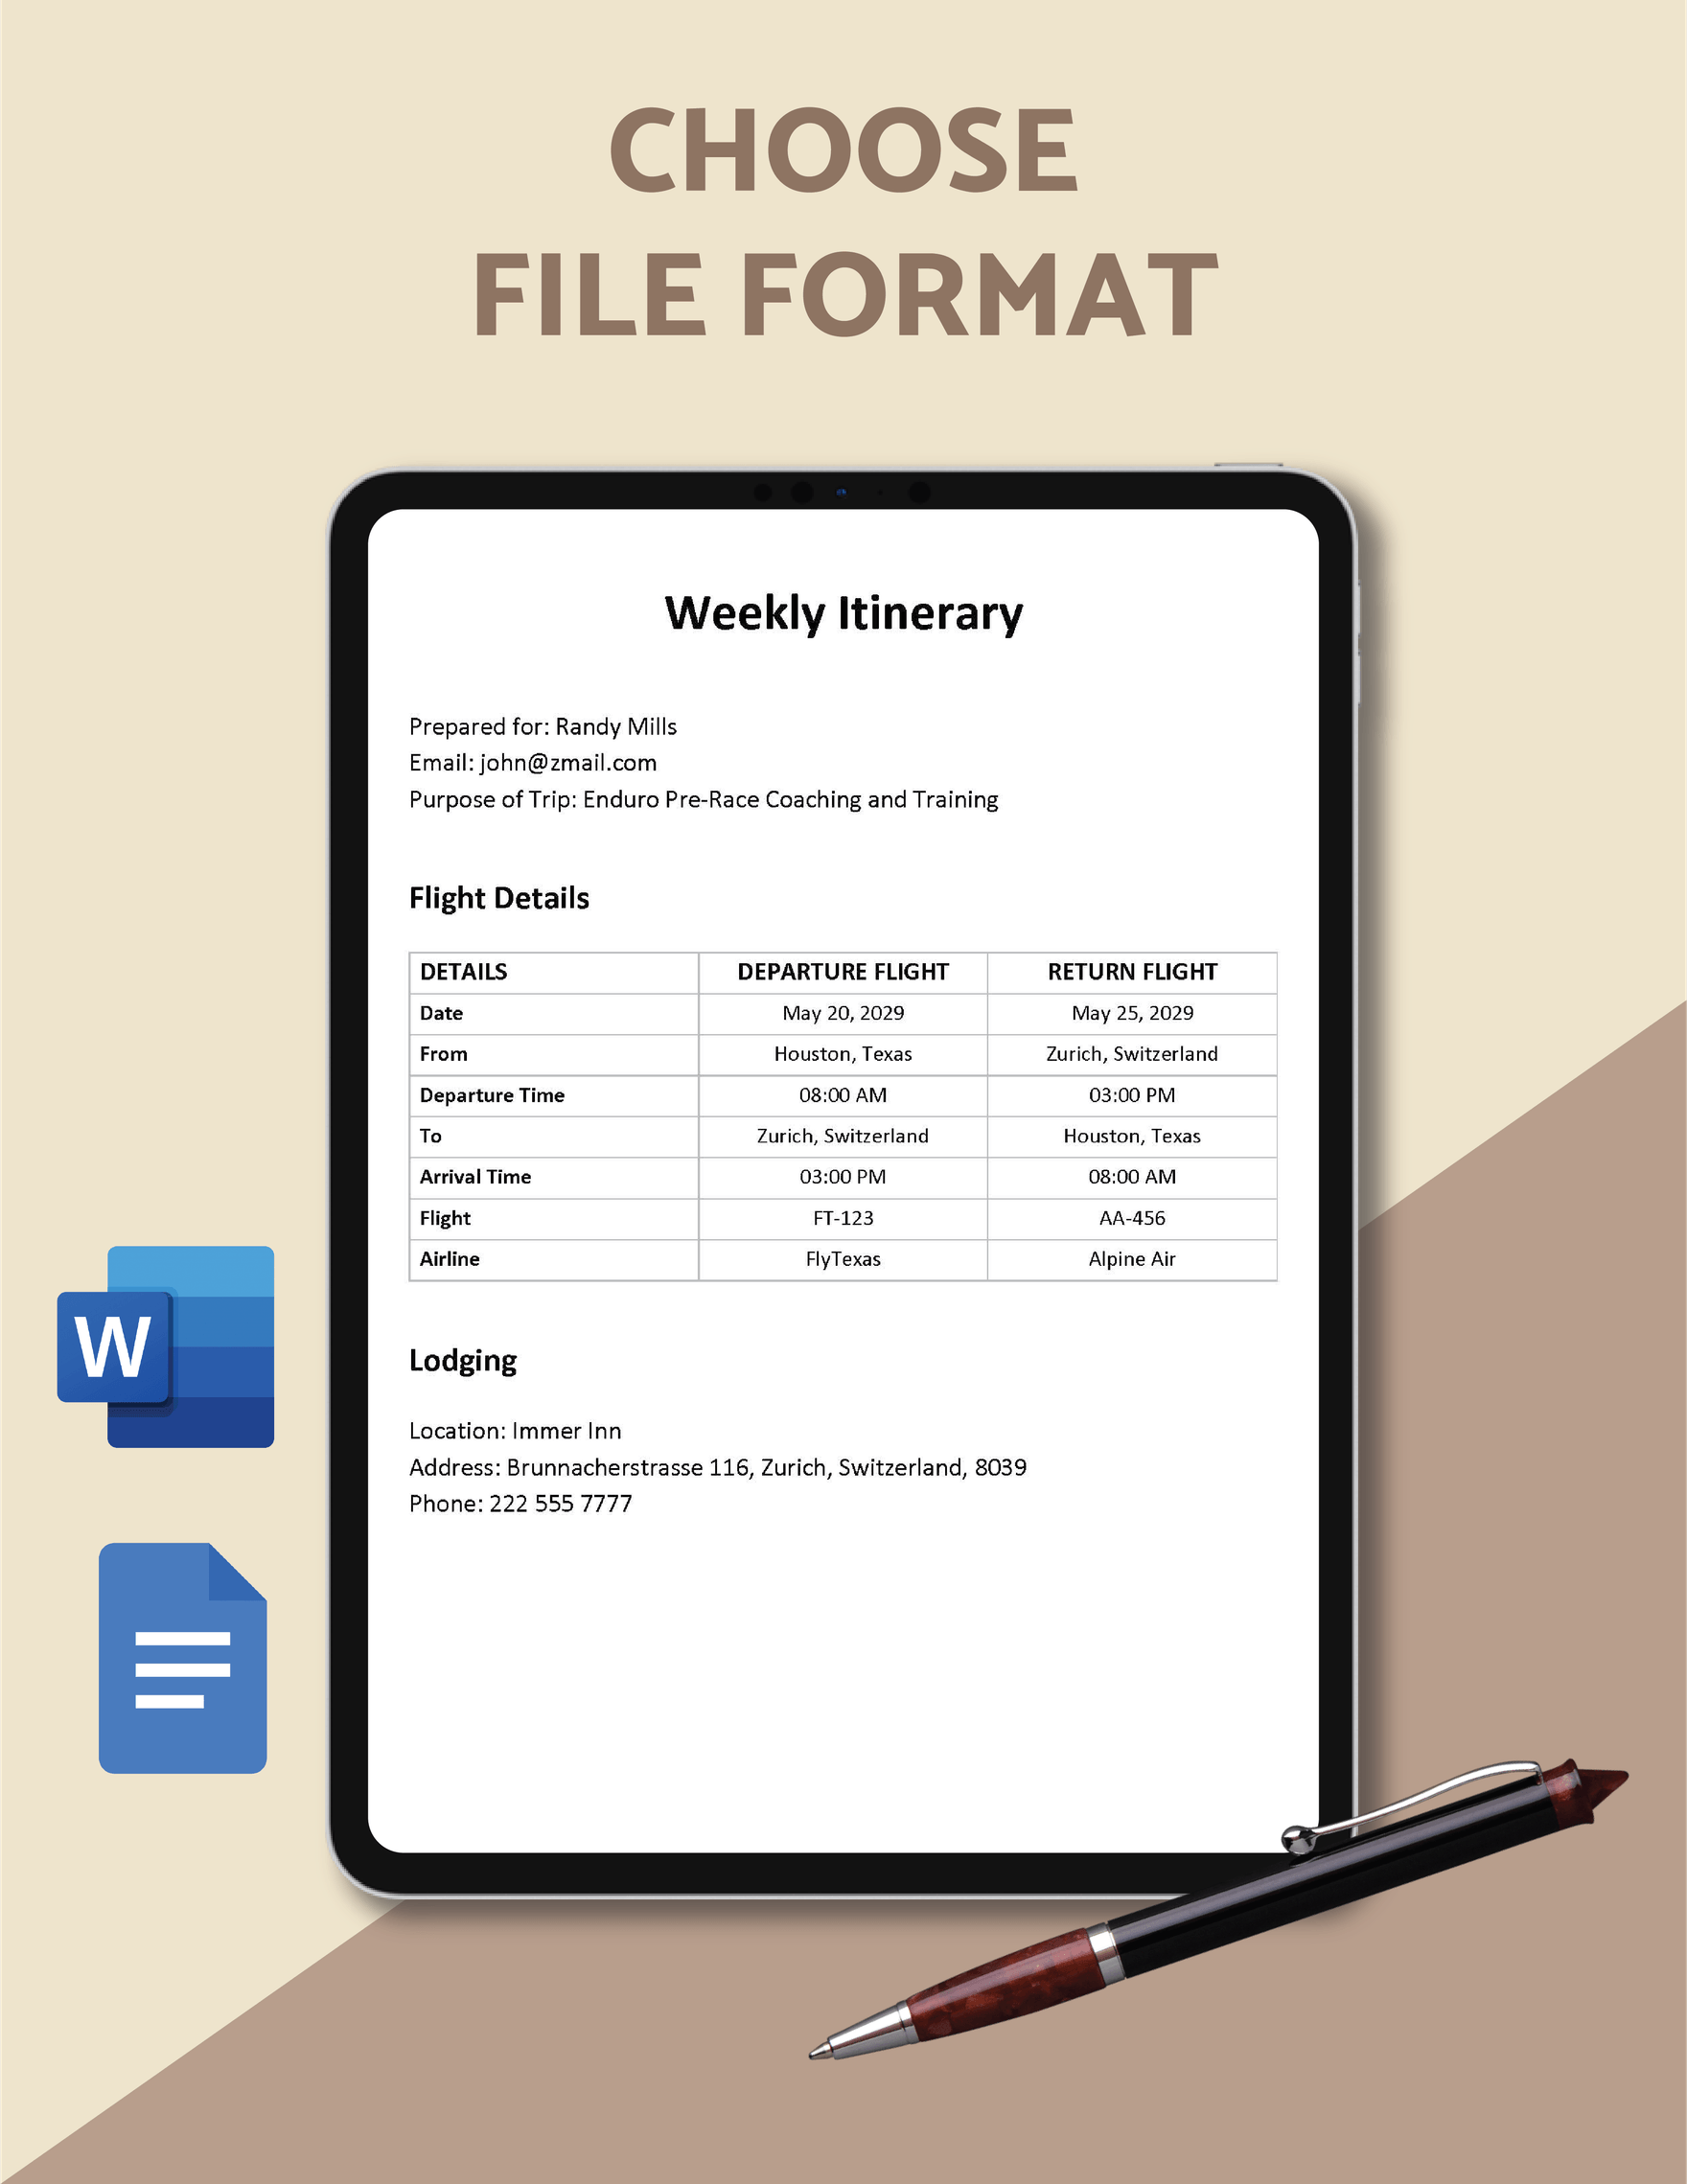 Weekly Itinerary Template